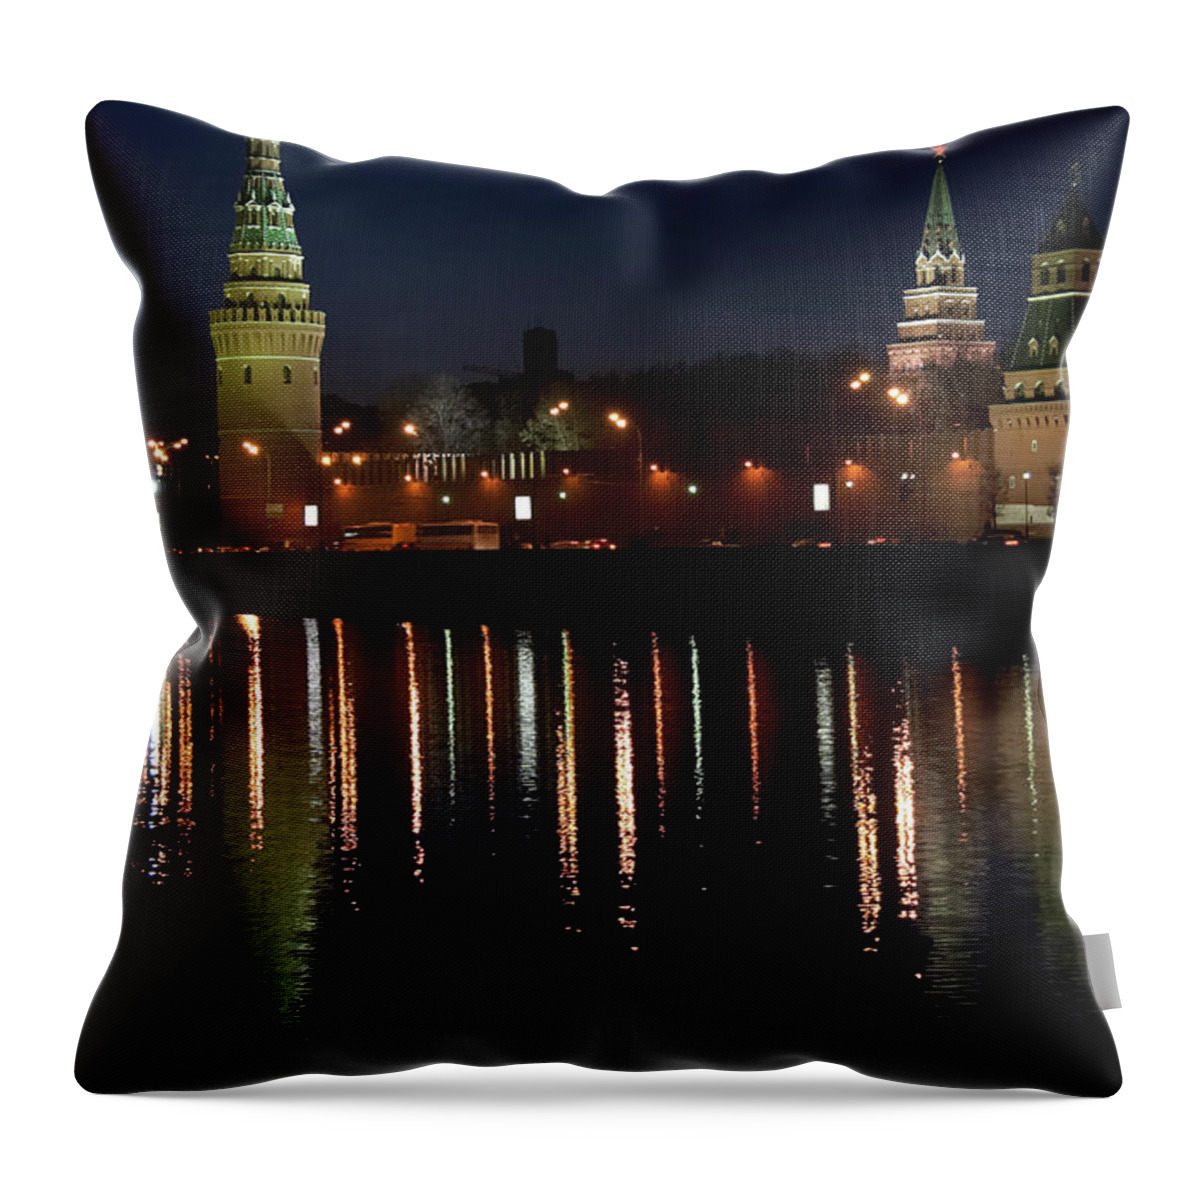 Red Square Throw Pillow featuring the photograph Kremlin At Night by Duckbay